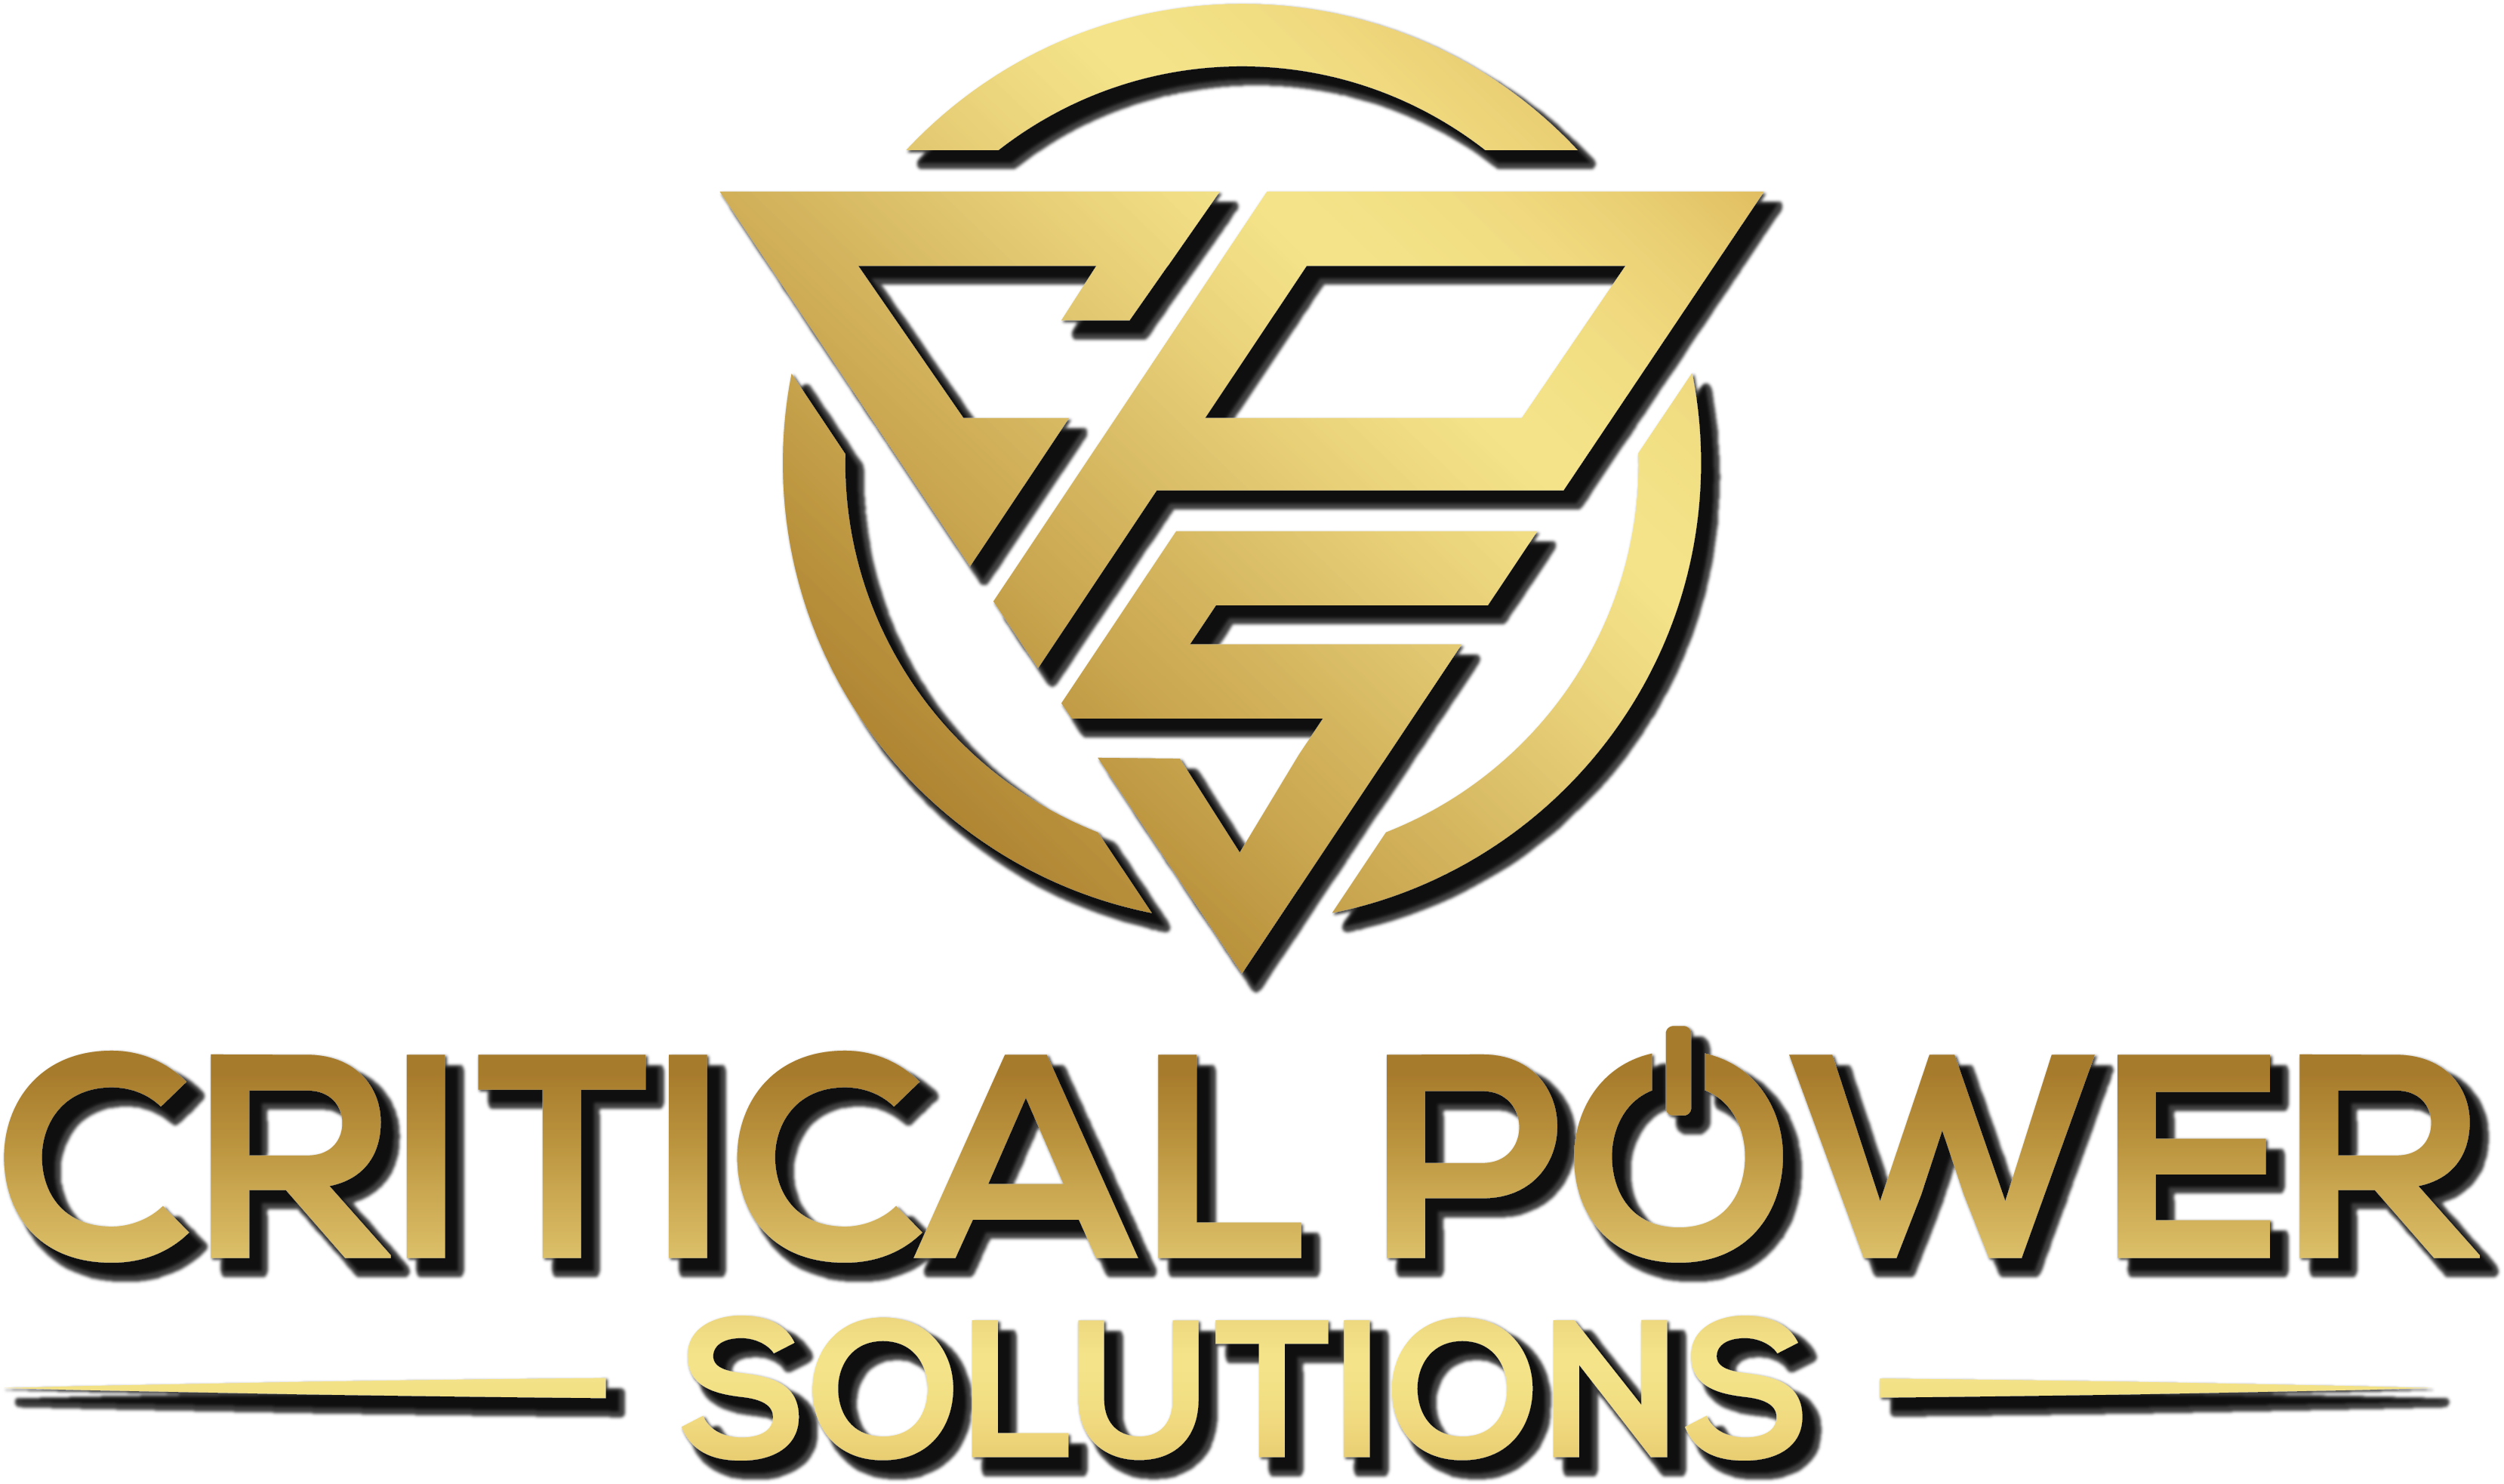 Critical Power Solutions